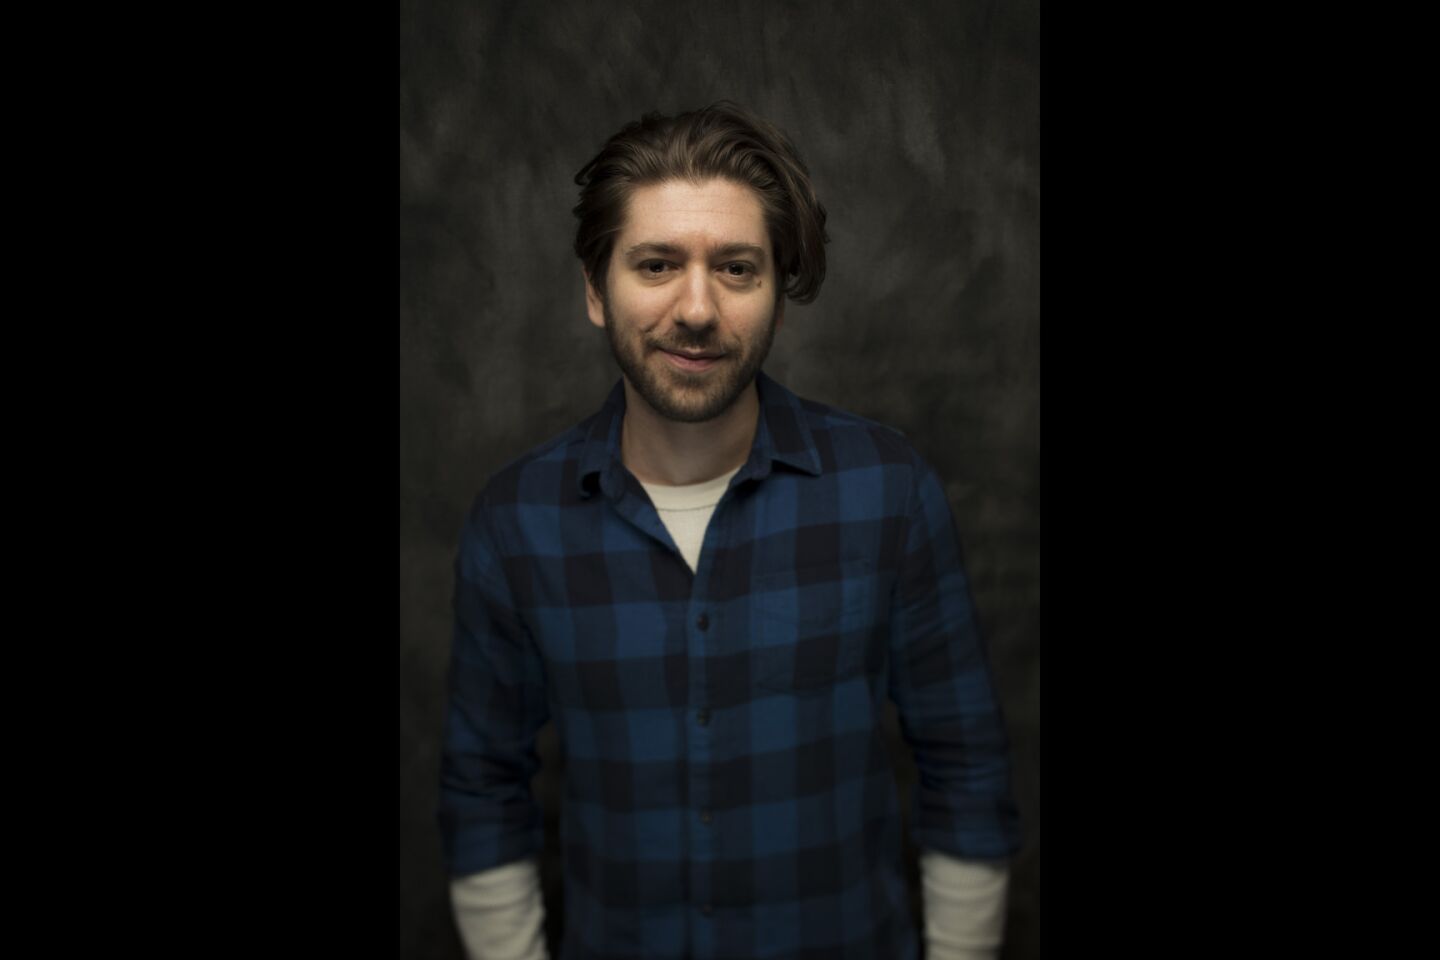 Actor Michael Zegen, from the film, "Tyrel," photographed in the L.A. Times Studio during the Sundance Film Festival in Park City, Utah, Jan. 20, 2018.